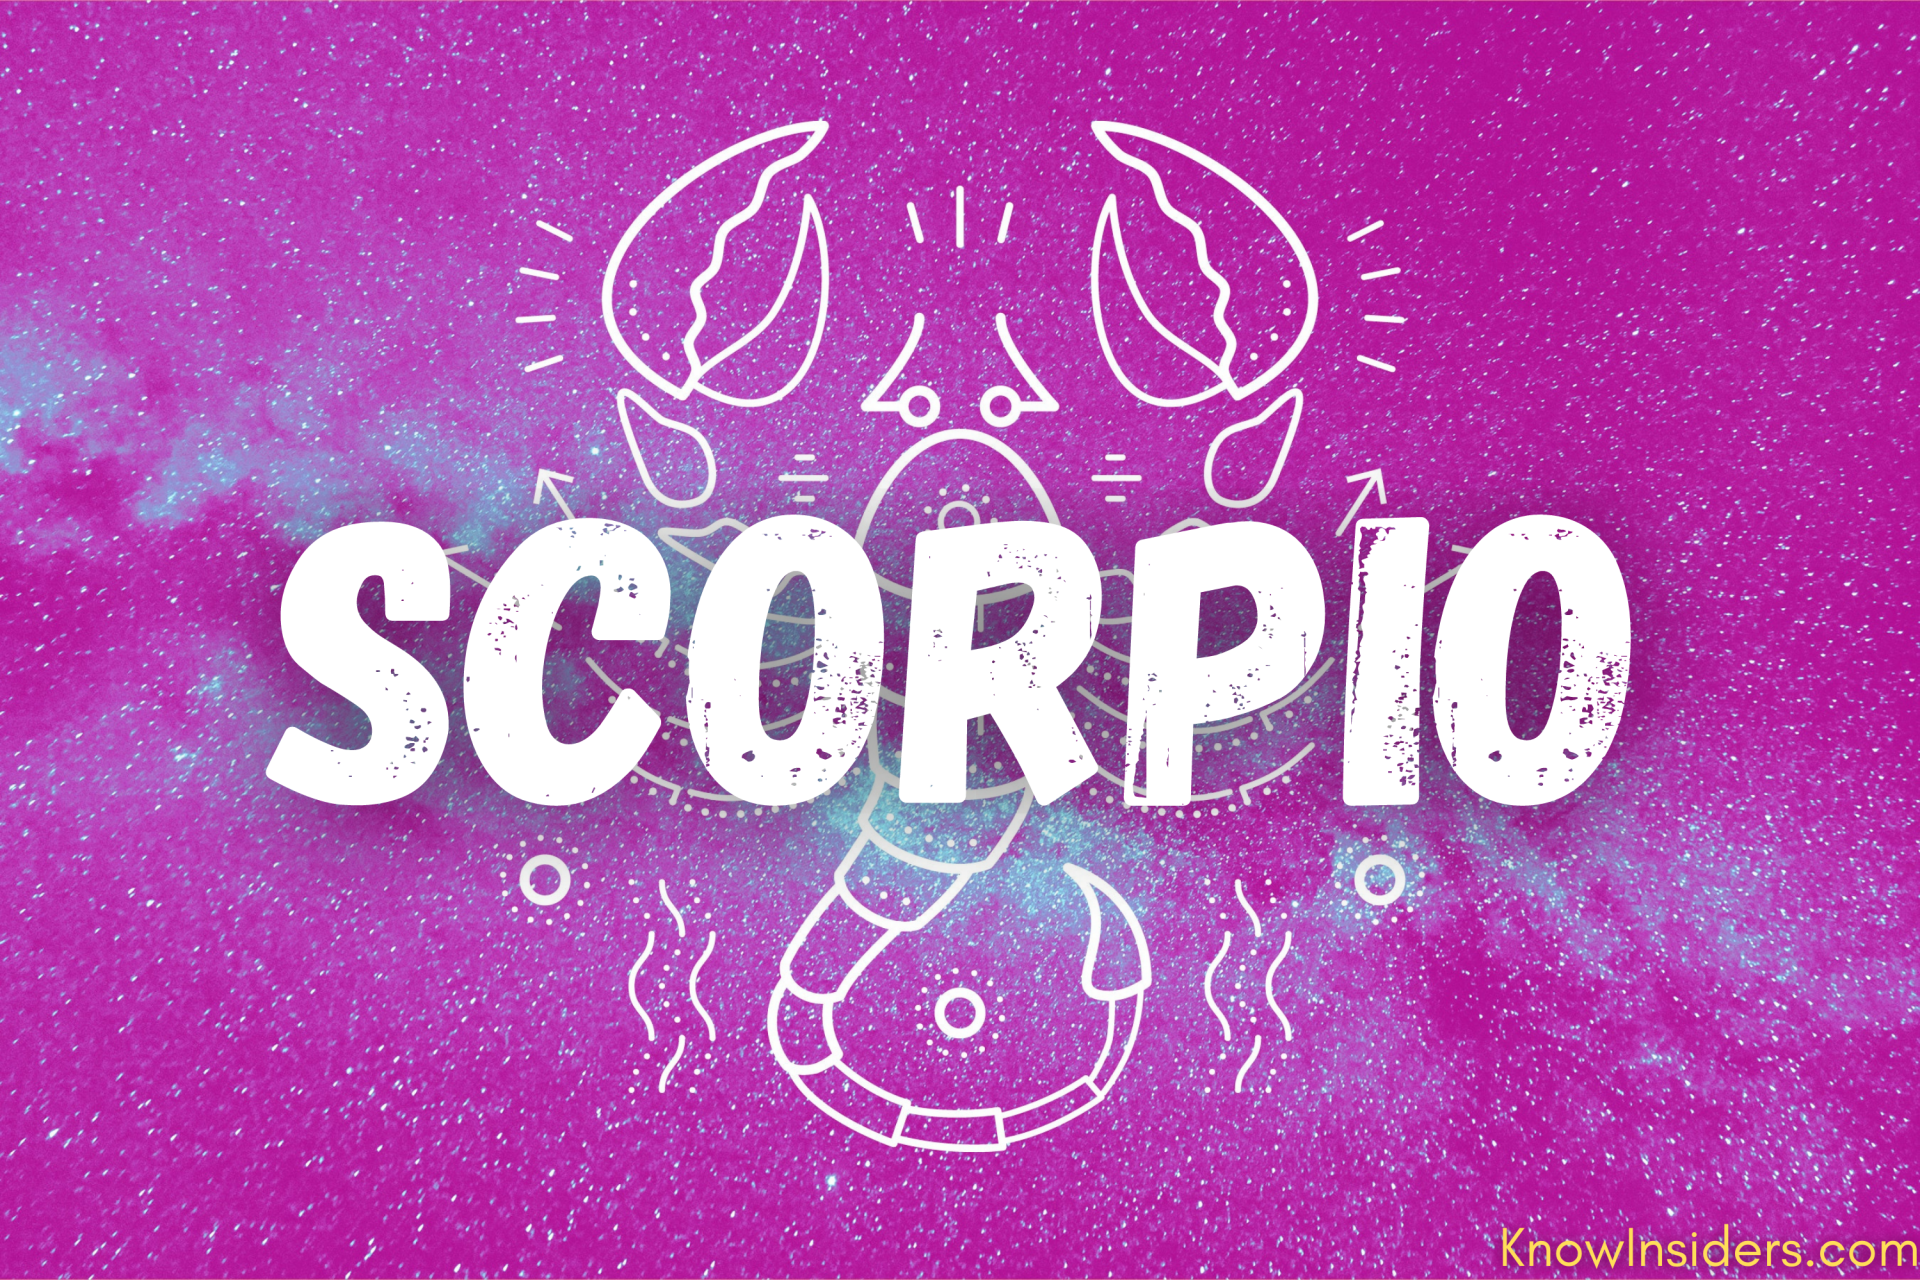 SCORPIO Weekly Horoscope 2 - 8 August, 2021: Predictions for Health, Love, Financial and Career